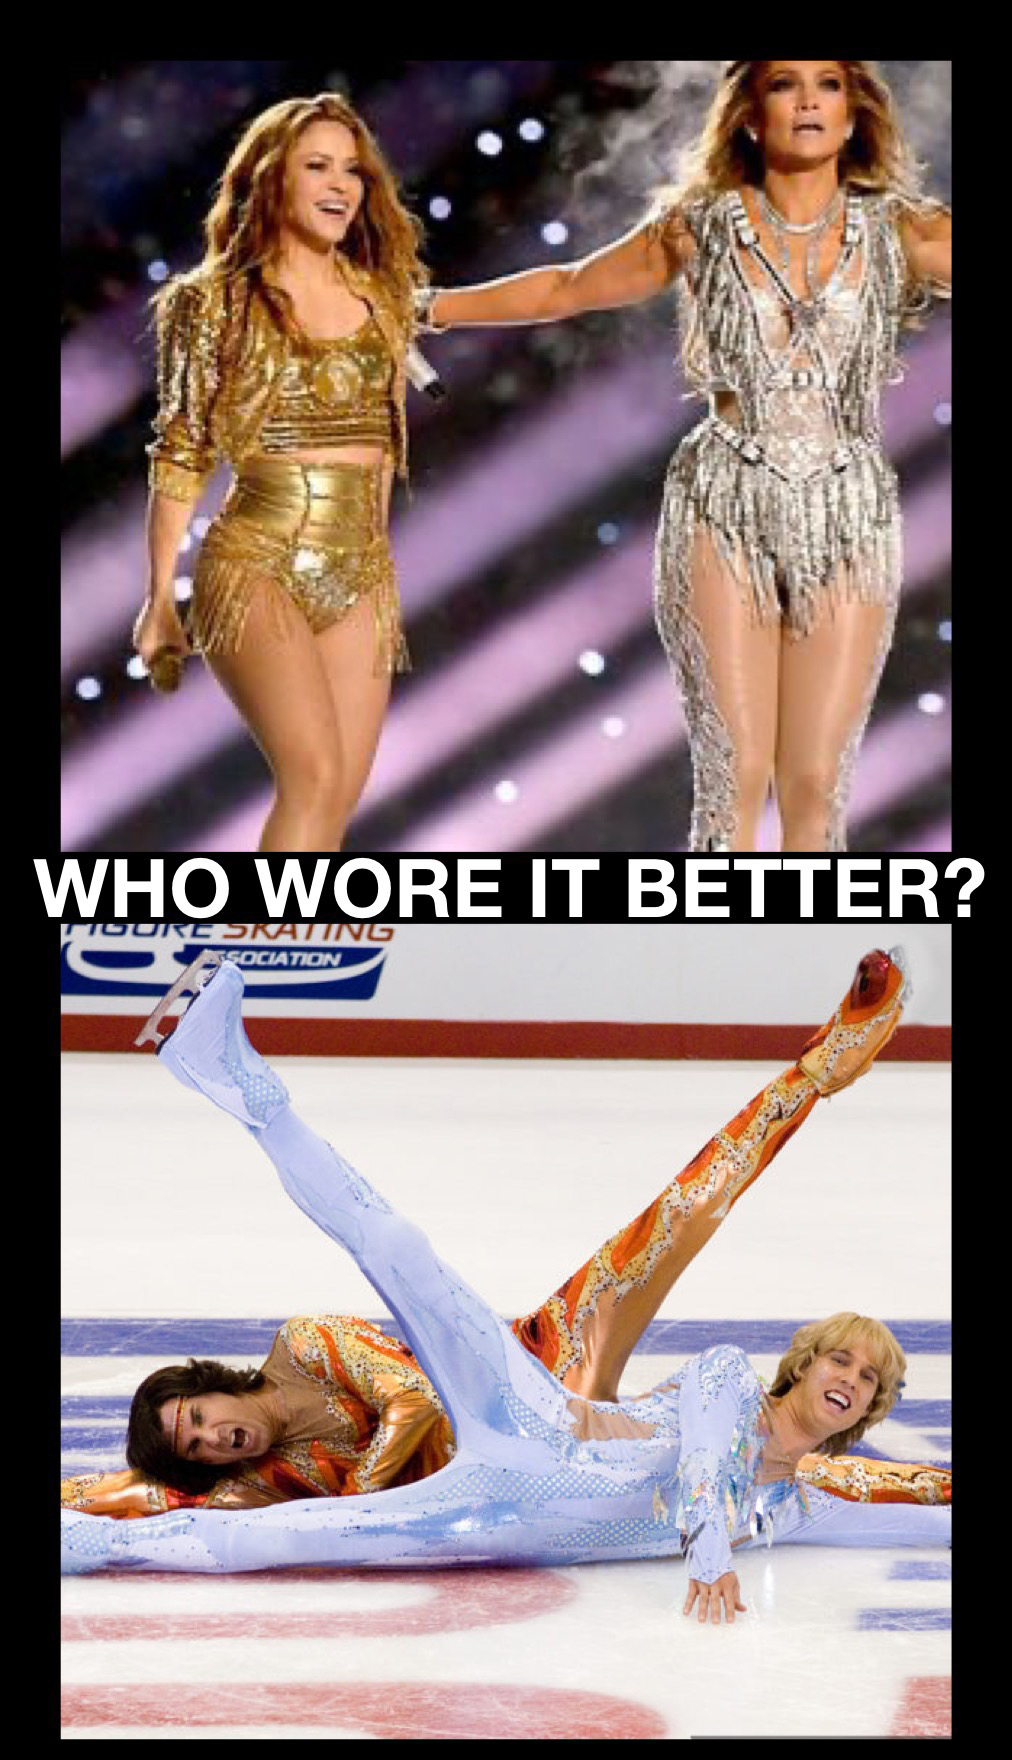 blades of glory - Who Wore It Better? C Ielletvg